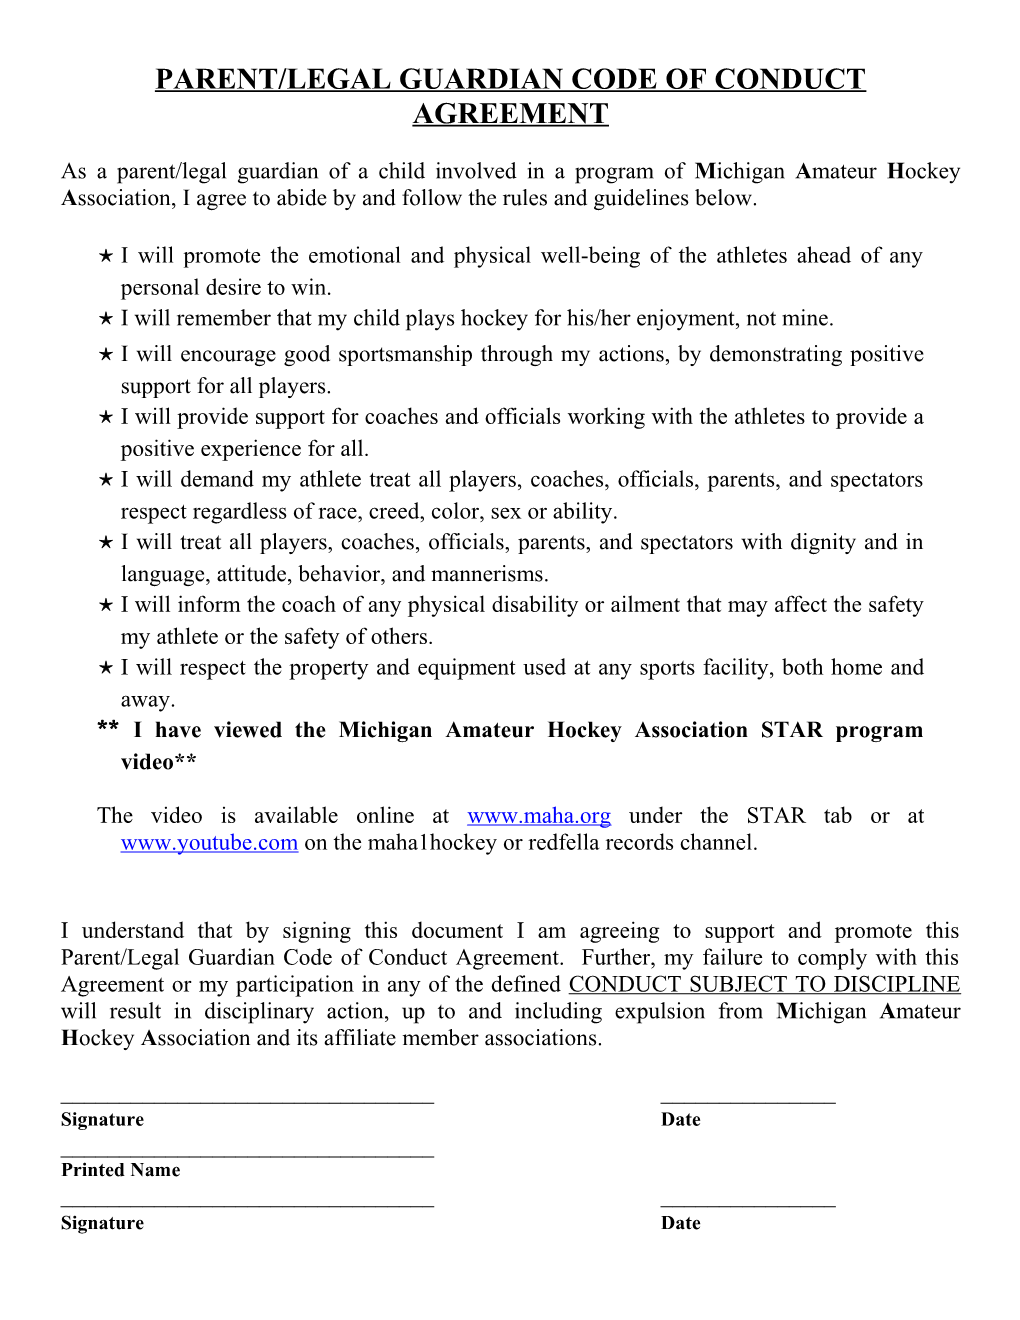 Parent/Legal Guardian Code of Conduct Agreement